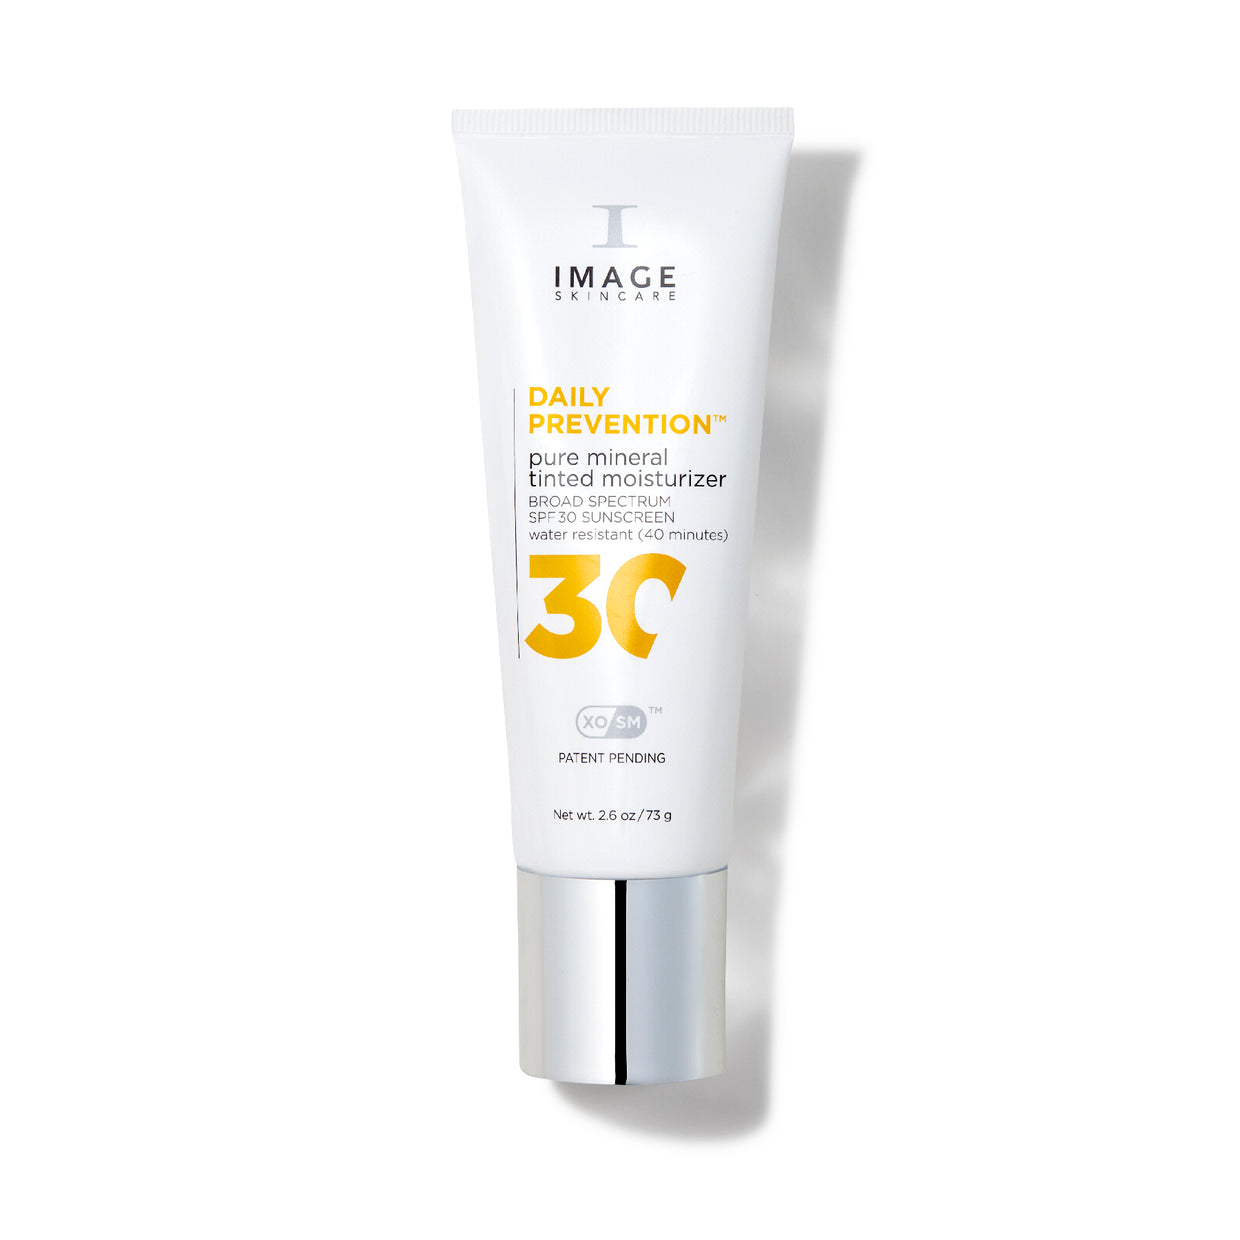 IMAGE Skincare Daily Prevention Pure Mineral Tinted Moisturizer SPF 30